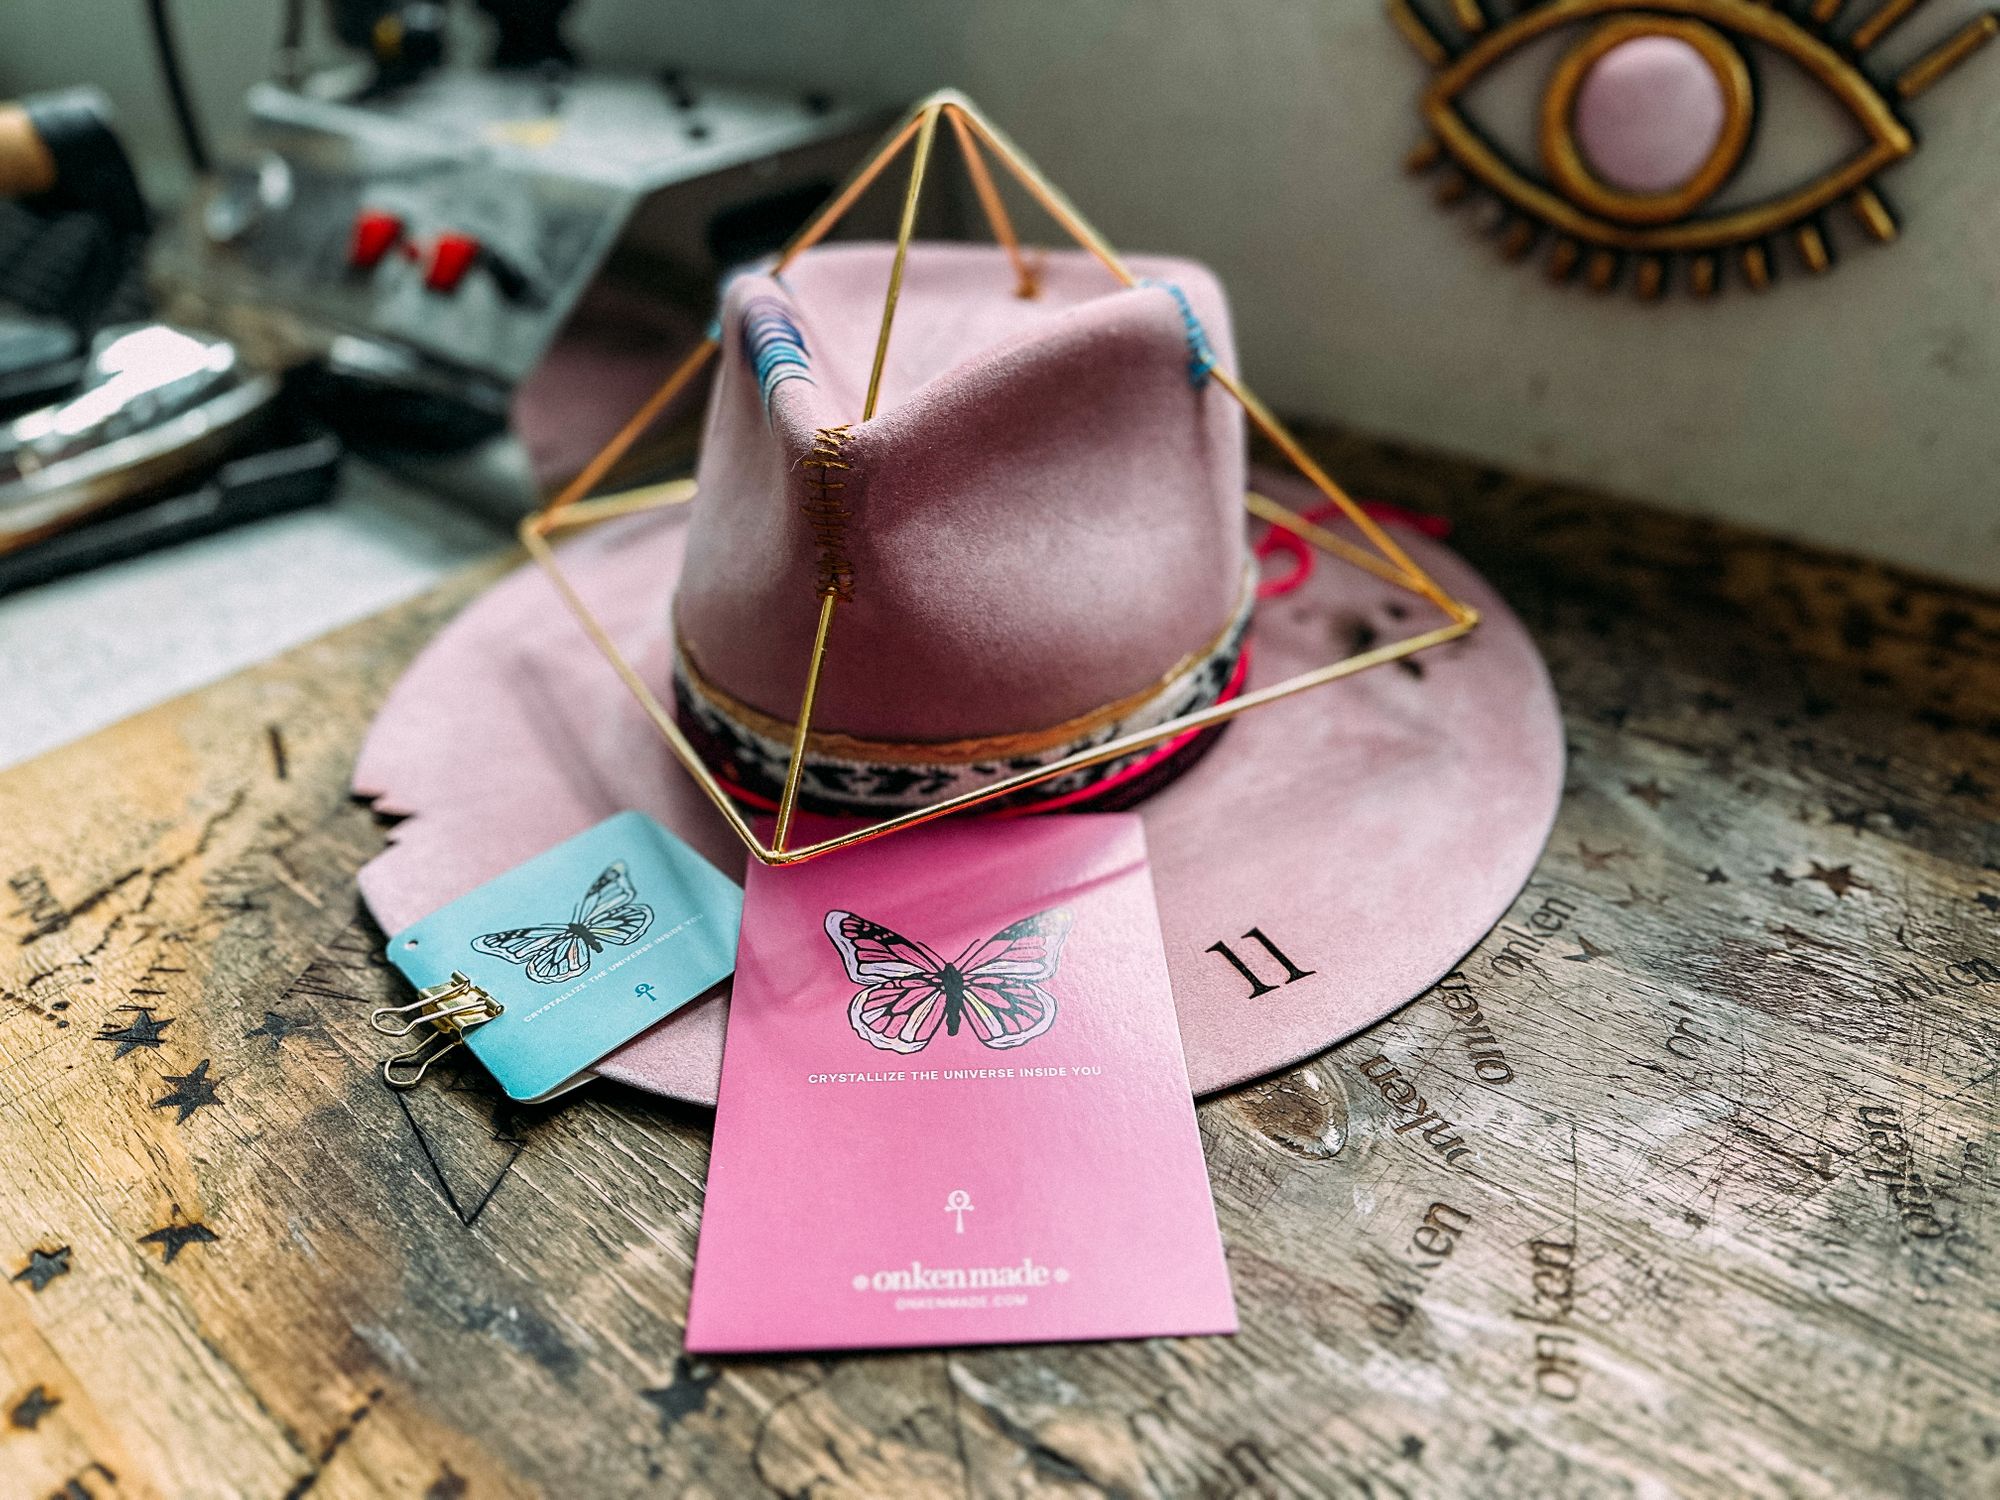 How Onken Made Channels Magic Through Custom Hats and noissue Packaging